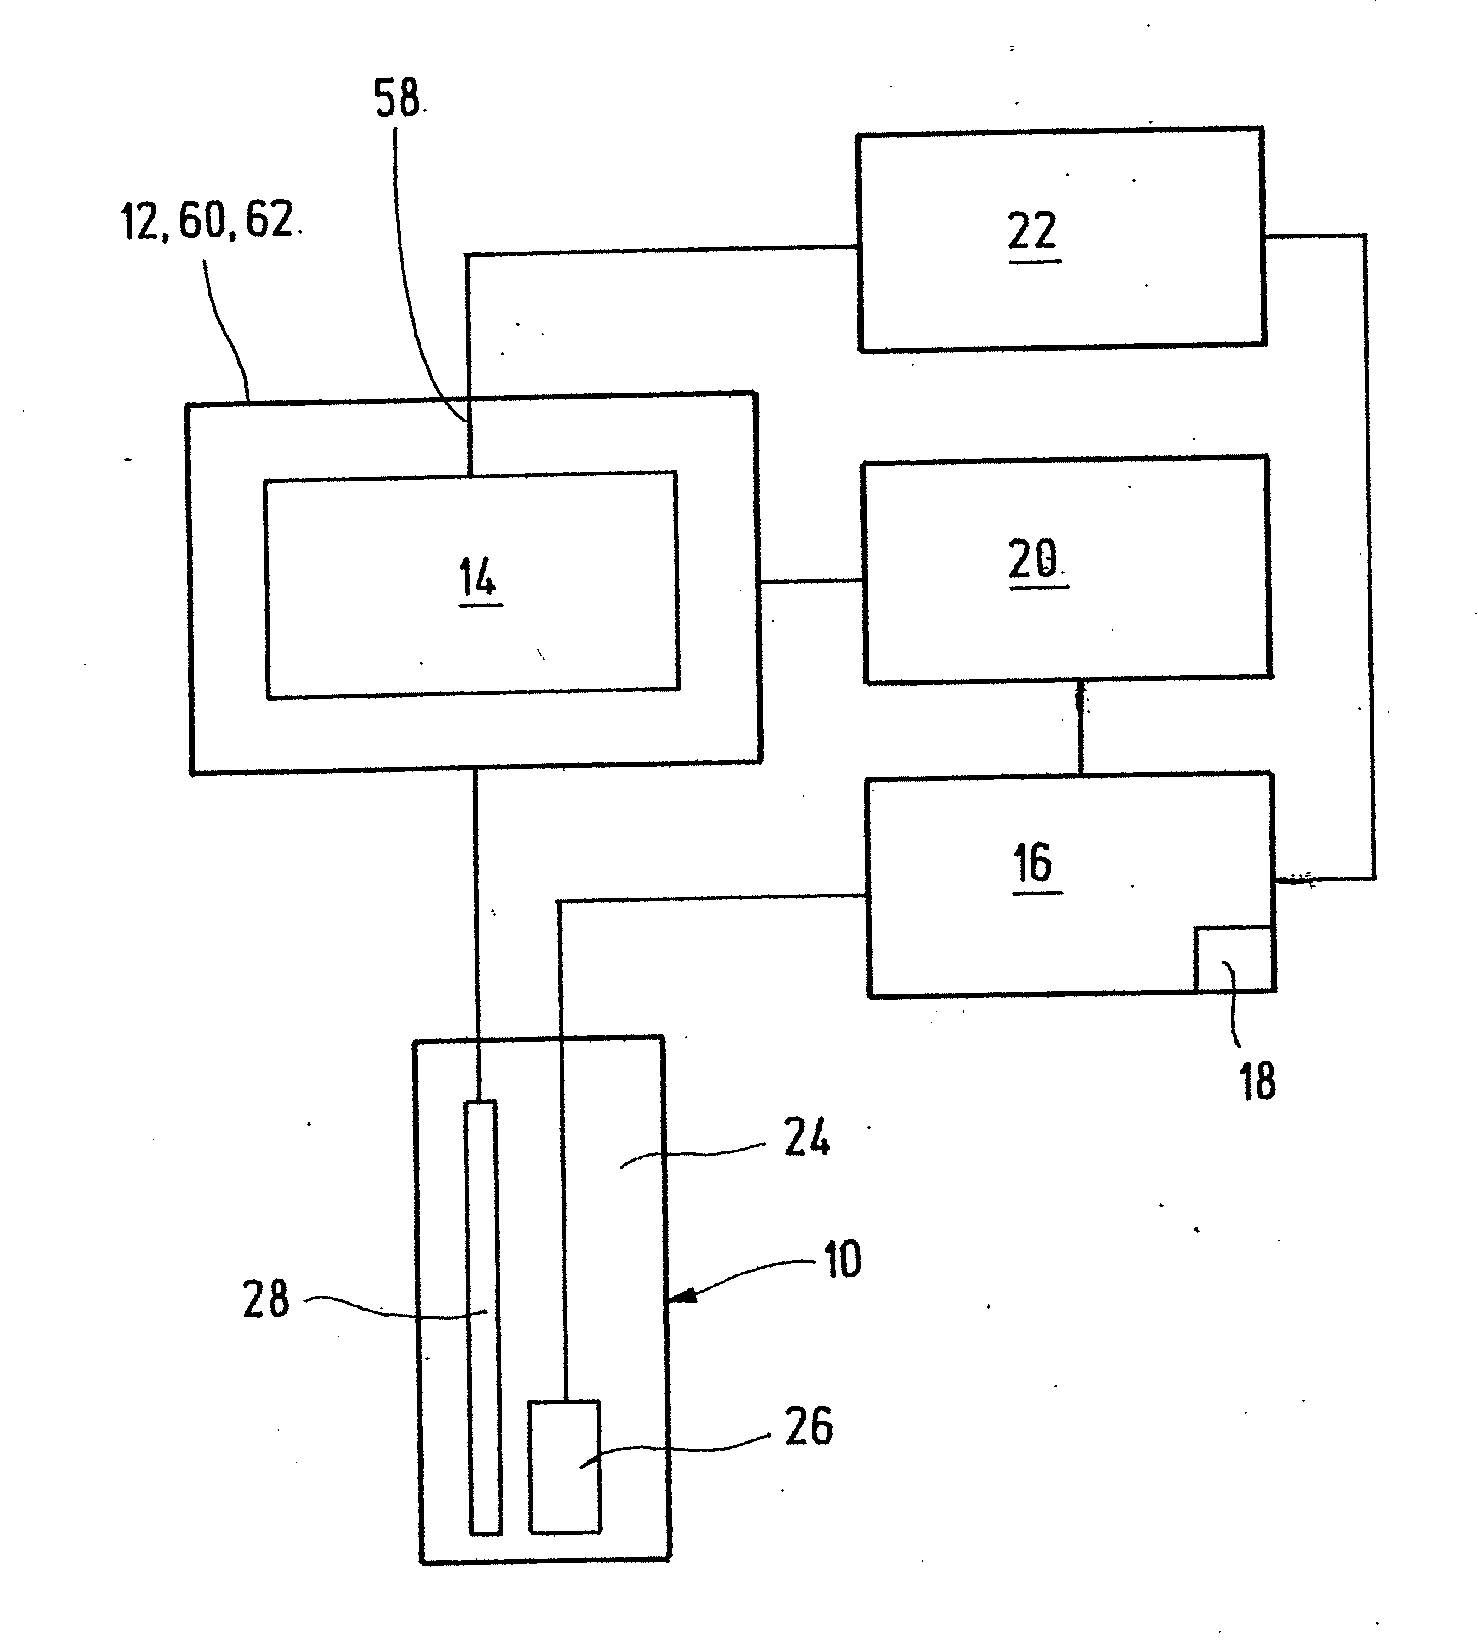 Analyte monitoring sensor system for monitoring a constituent in body tissue